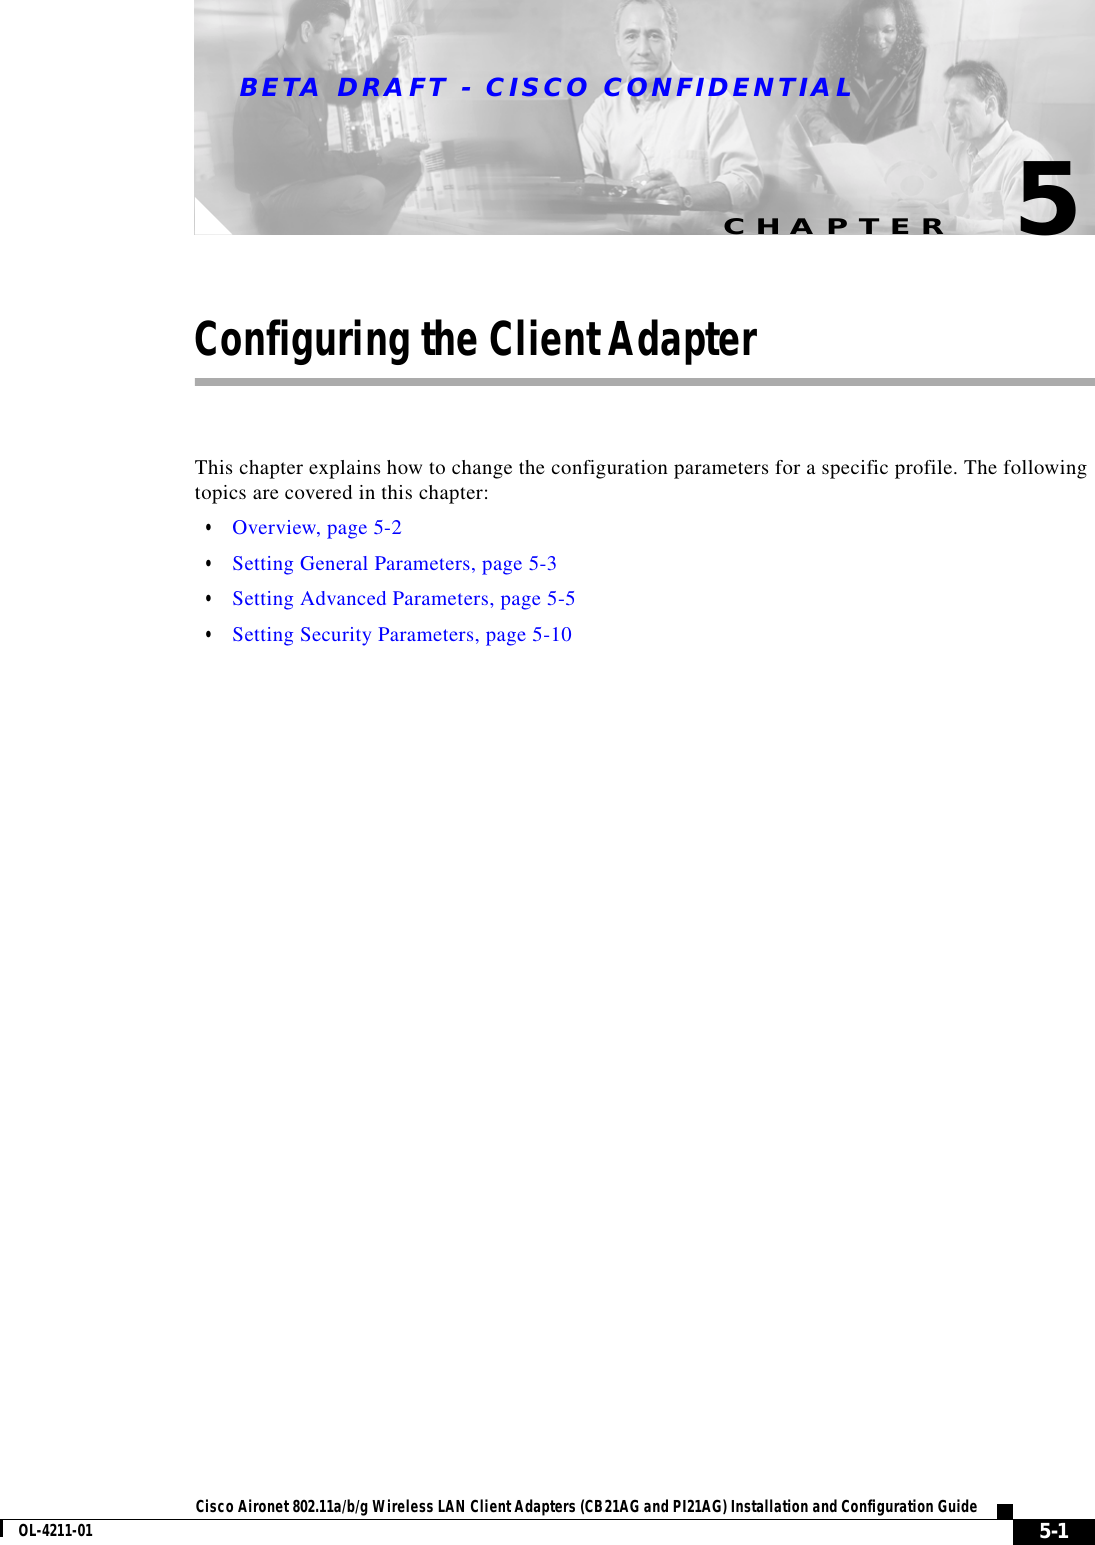 CHAPTERBETA DRAFT - CISCO CONFIDENTIAL5-1Cisco Aironet 802.11a/b/g Wireless LAN Client Adapters (CB21AG and PI21AG) Installation and Configuration GuideOL-4211-015Configuring the Client AdapterThis chapter explains how to change the configuration parameters for a specific profile. The following topics are covered in this chapter:•Overview, page 5-2•Setting General Parameters, page 5-3•Setting Advanced Parameters, page 5-5•Setting Security Parameters, page 5-10